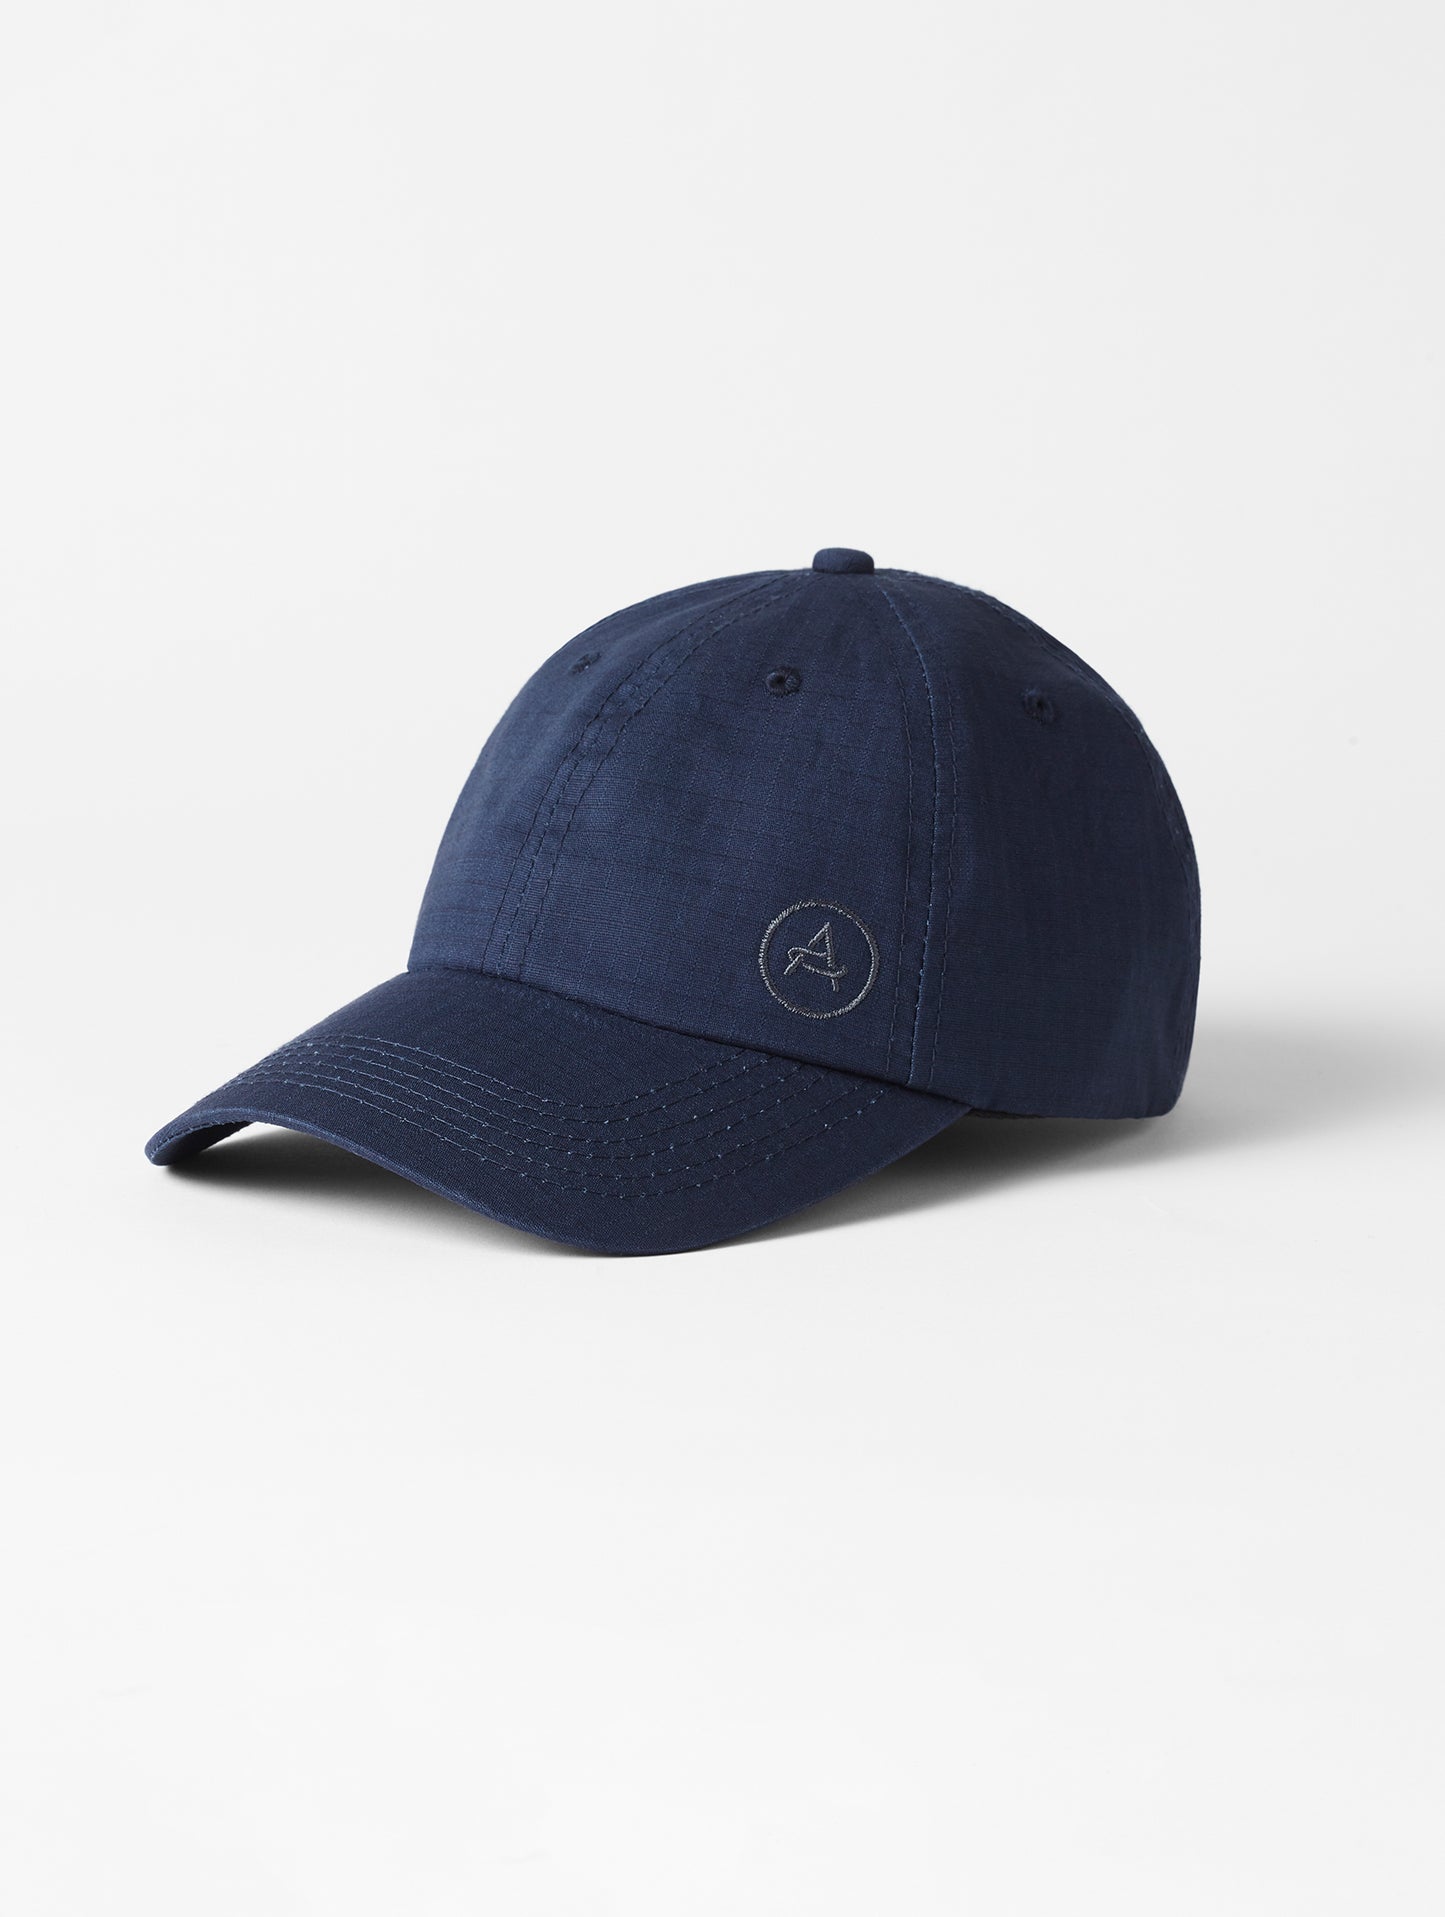 hat from Aether Apparel